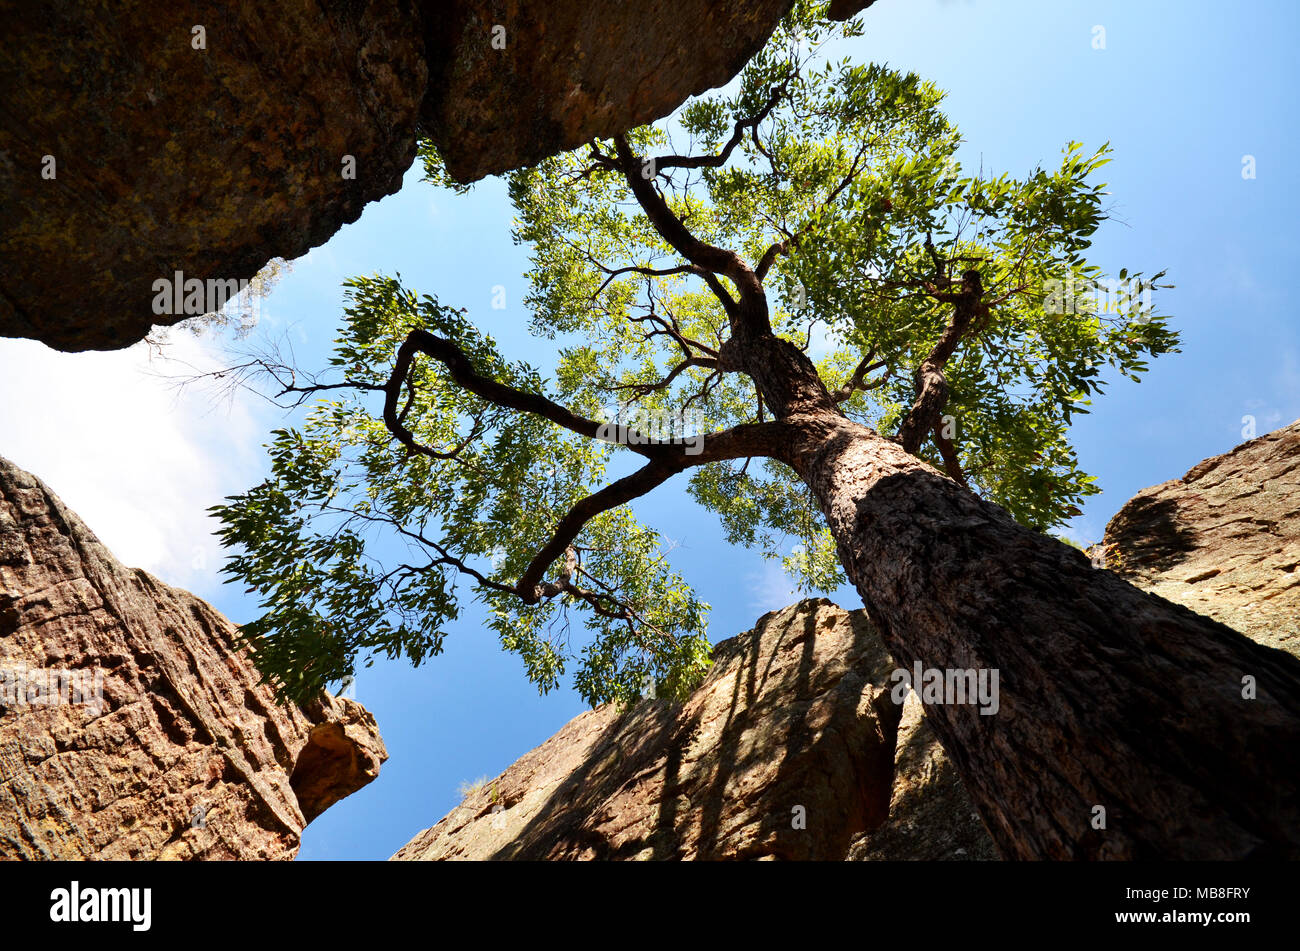 Looking up towards sky through tree canopy surrounded by rocks Stock Photo